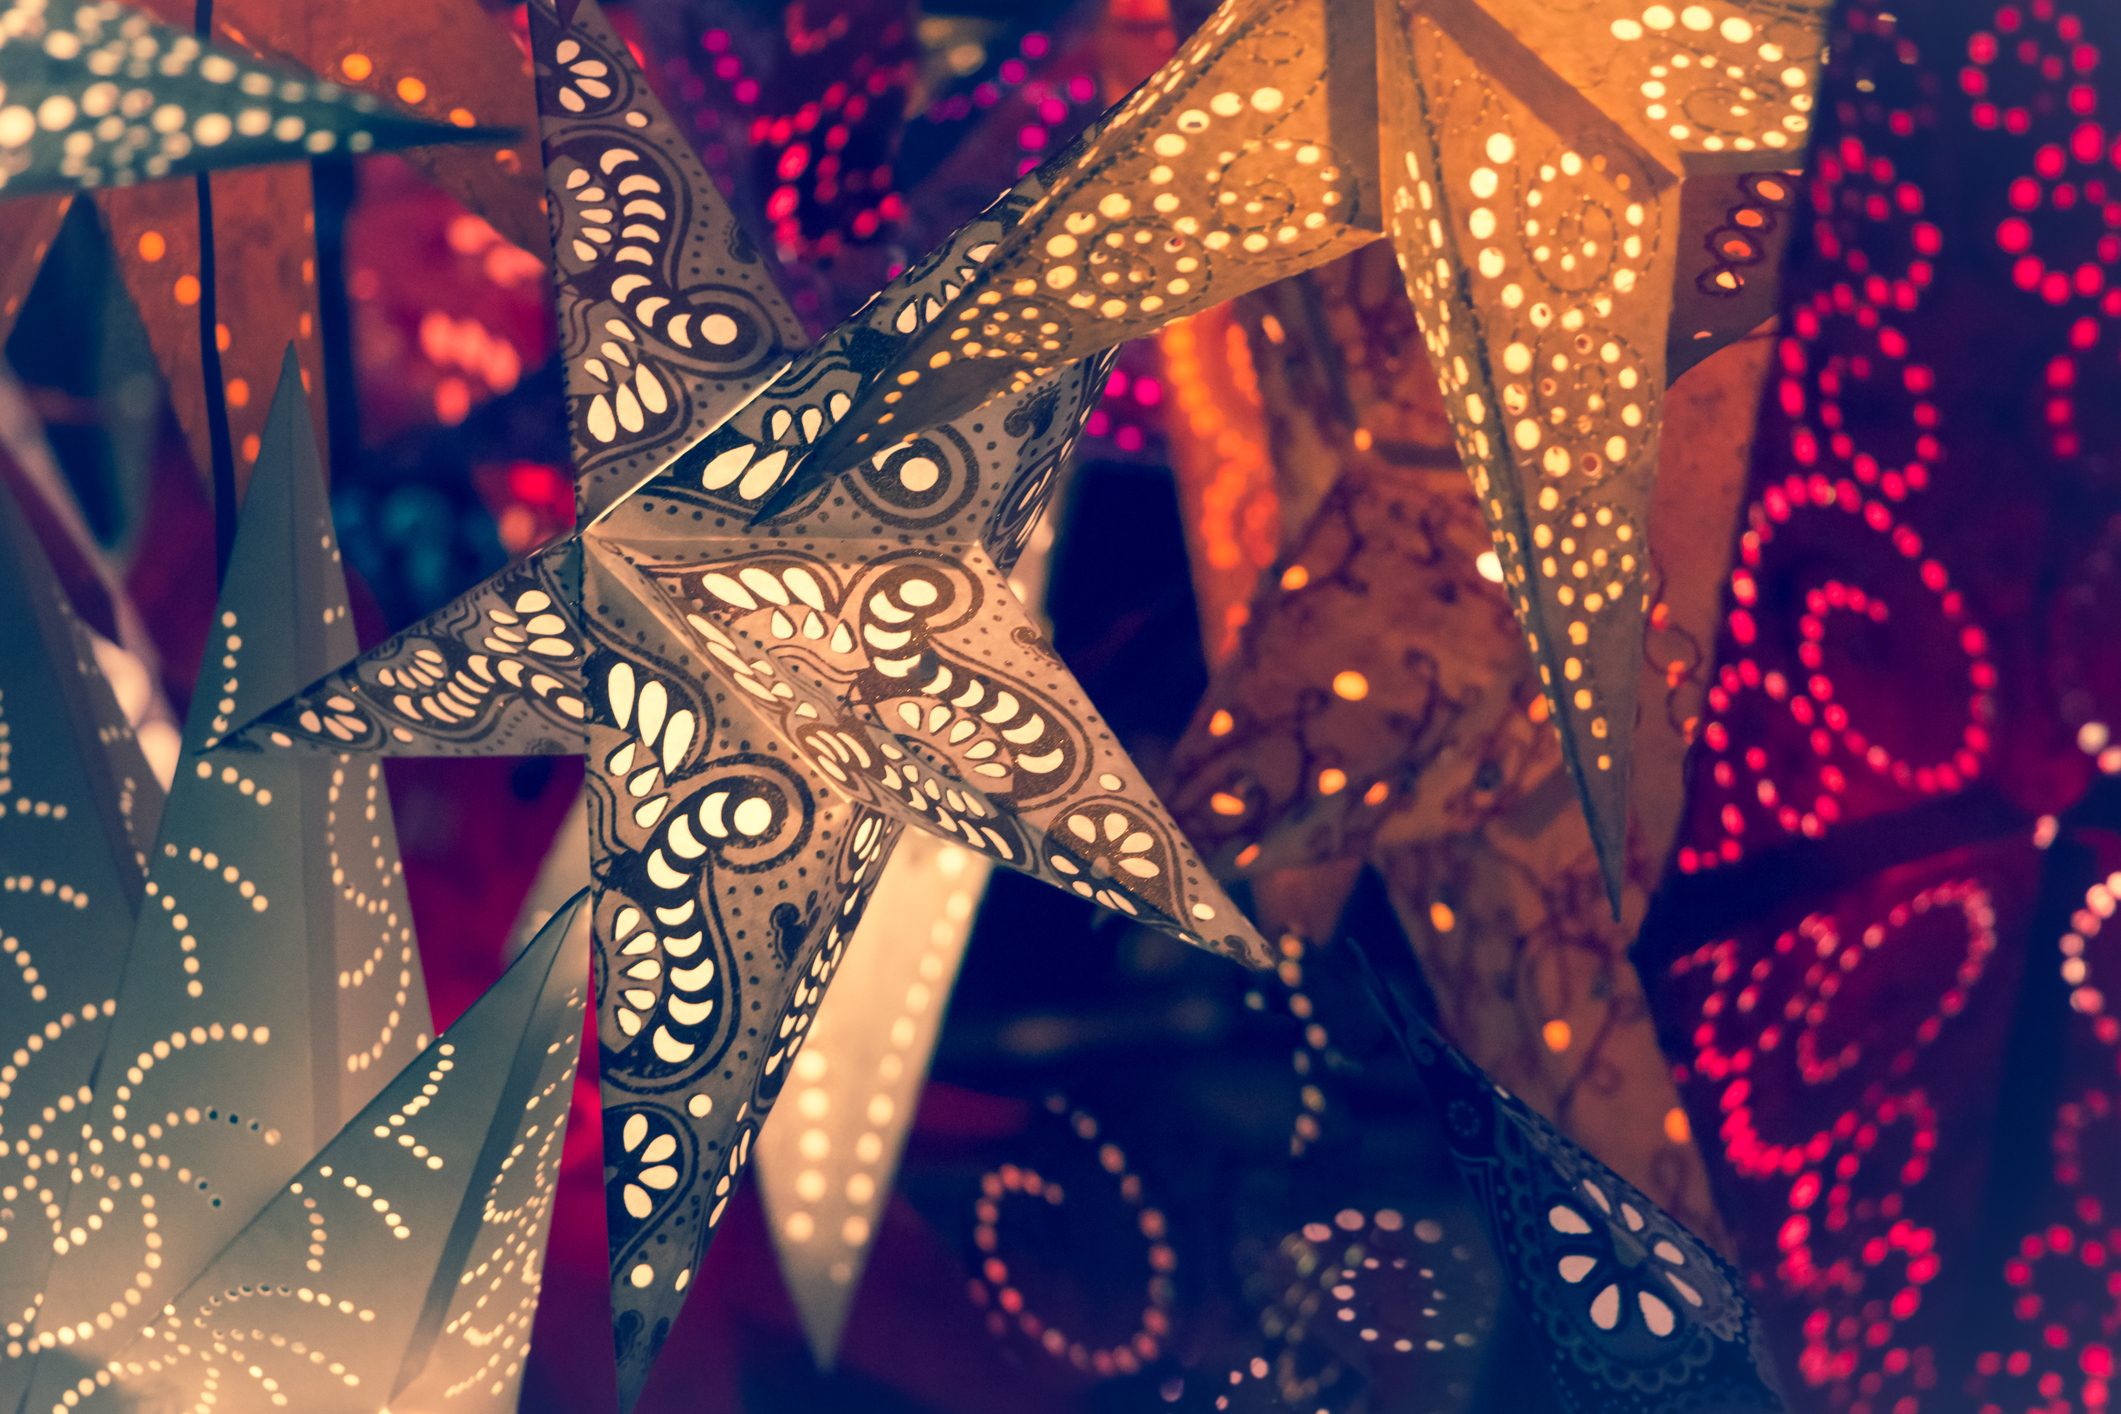 Beautiful shiny star mood lamp in merry advent decoration.